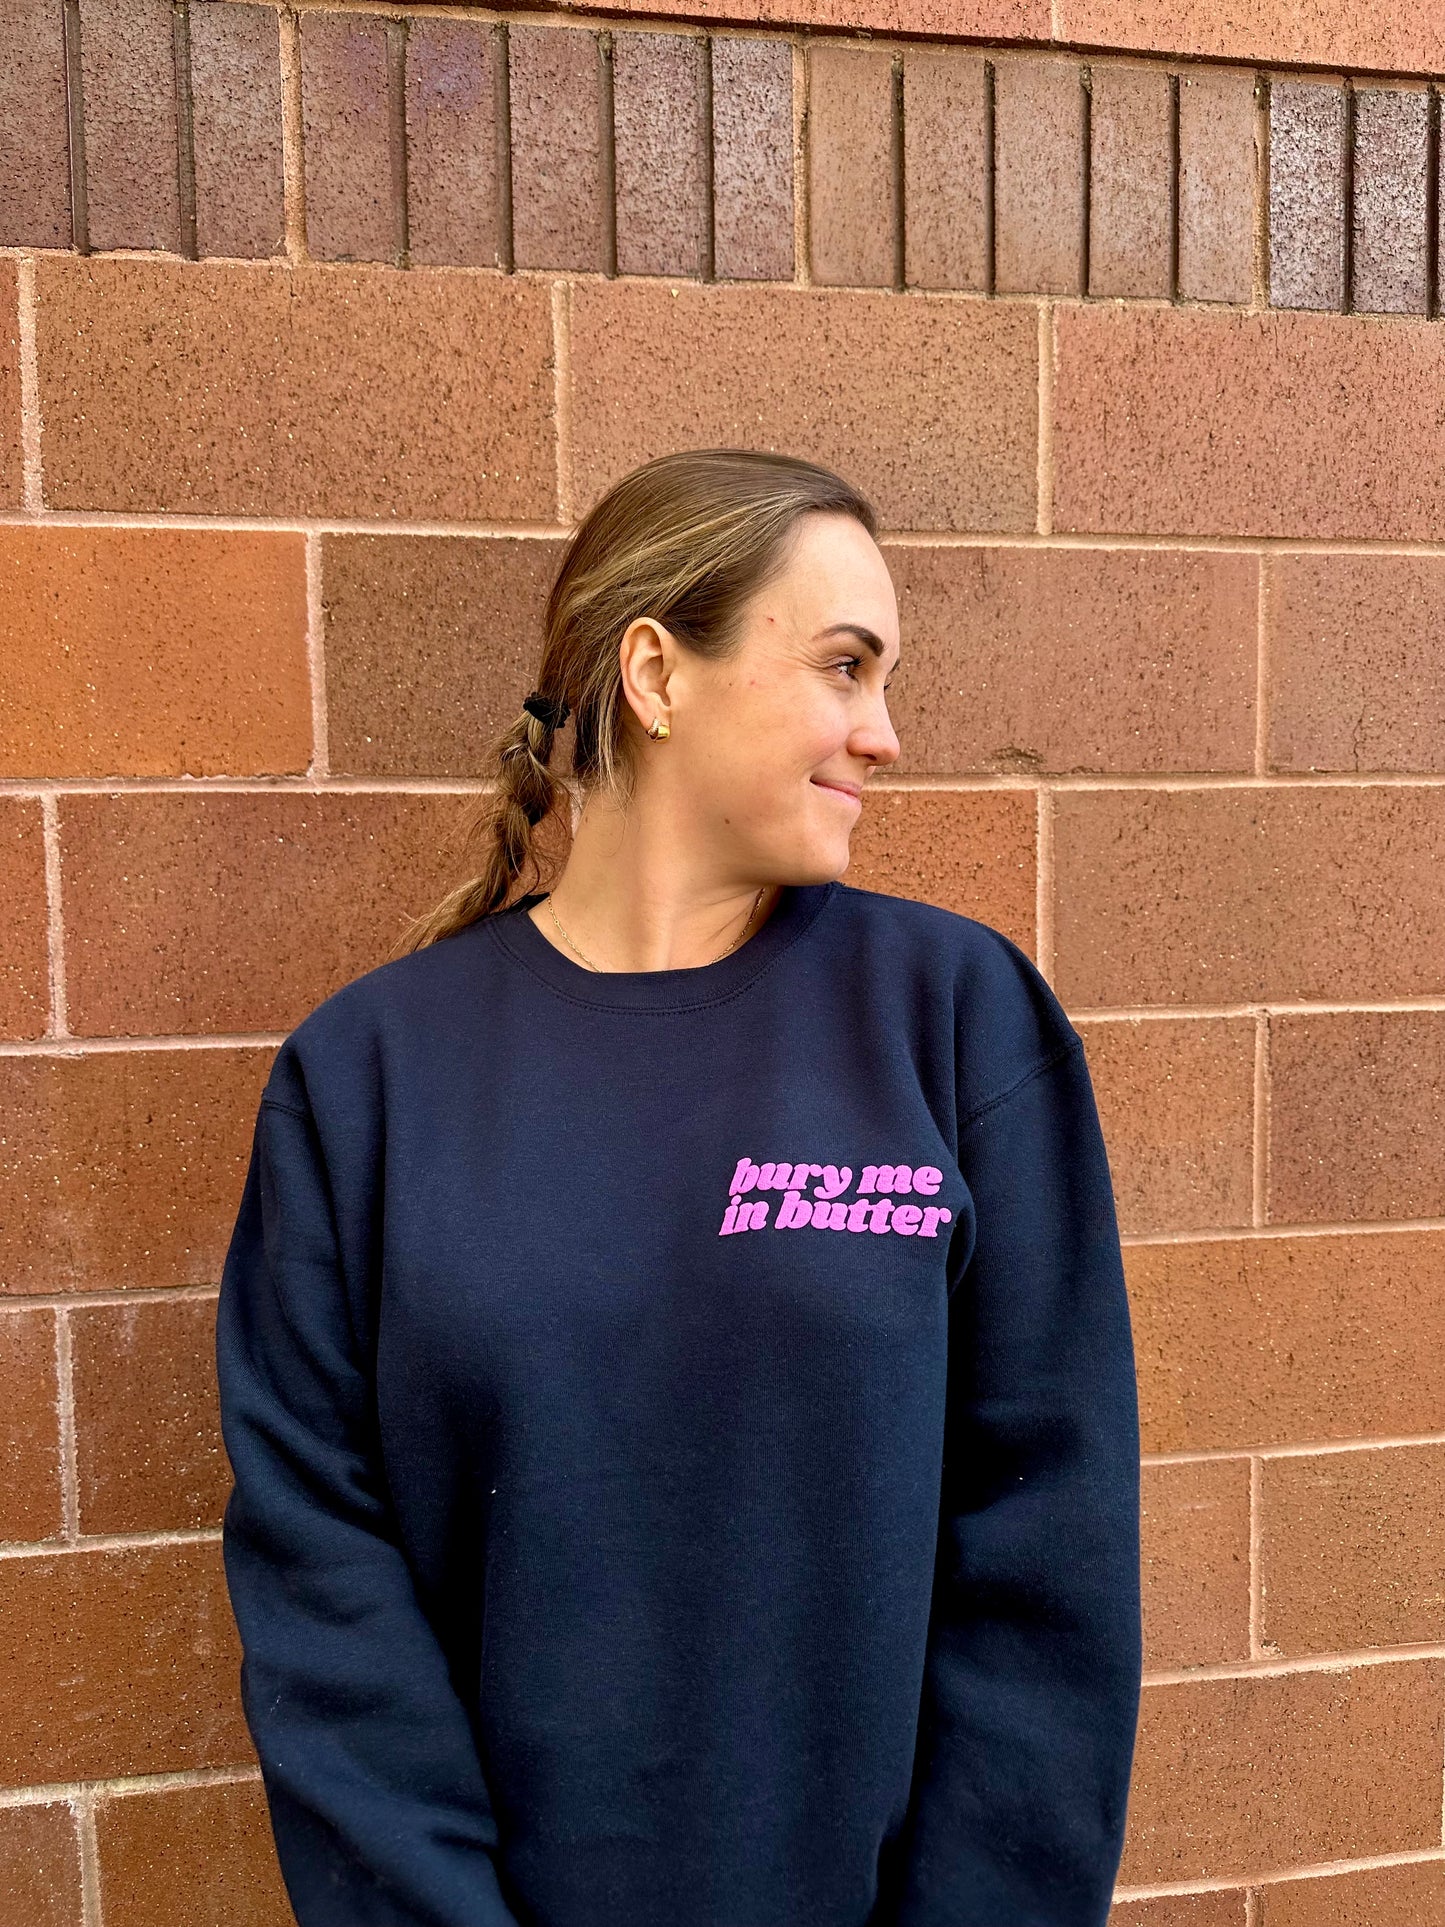 The Dough Lady: Bury Me In Butter Crewneck